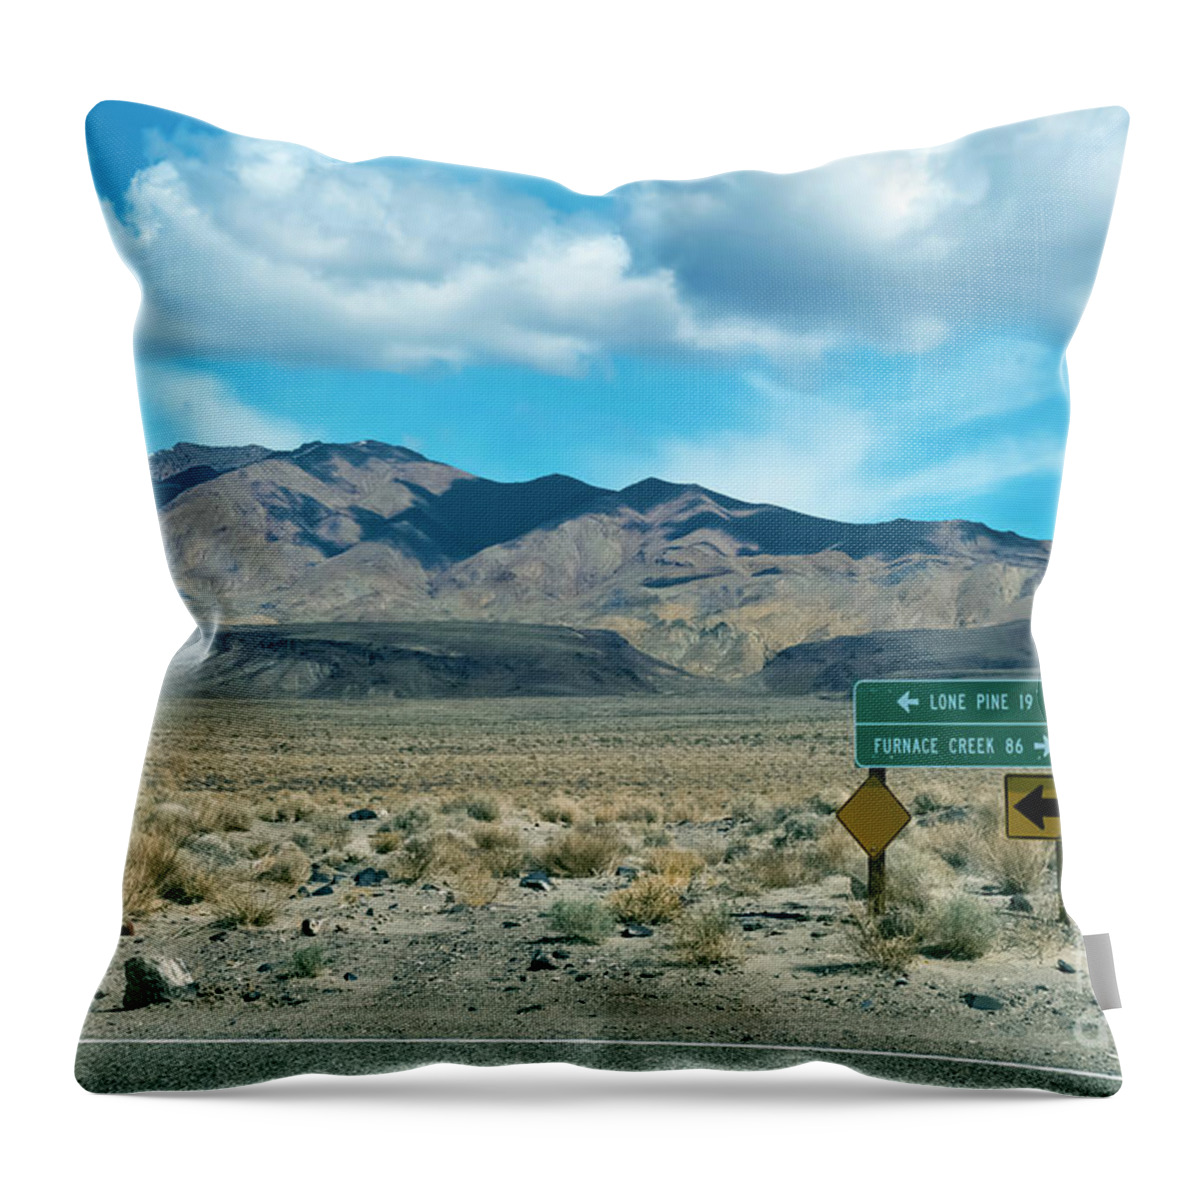 Route To Death Valley Throw Pillow featuring the photograph Route To Death Valley by David Zanzinger